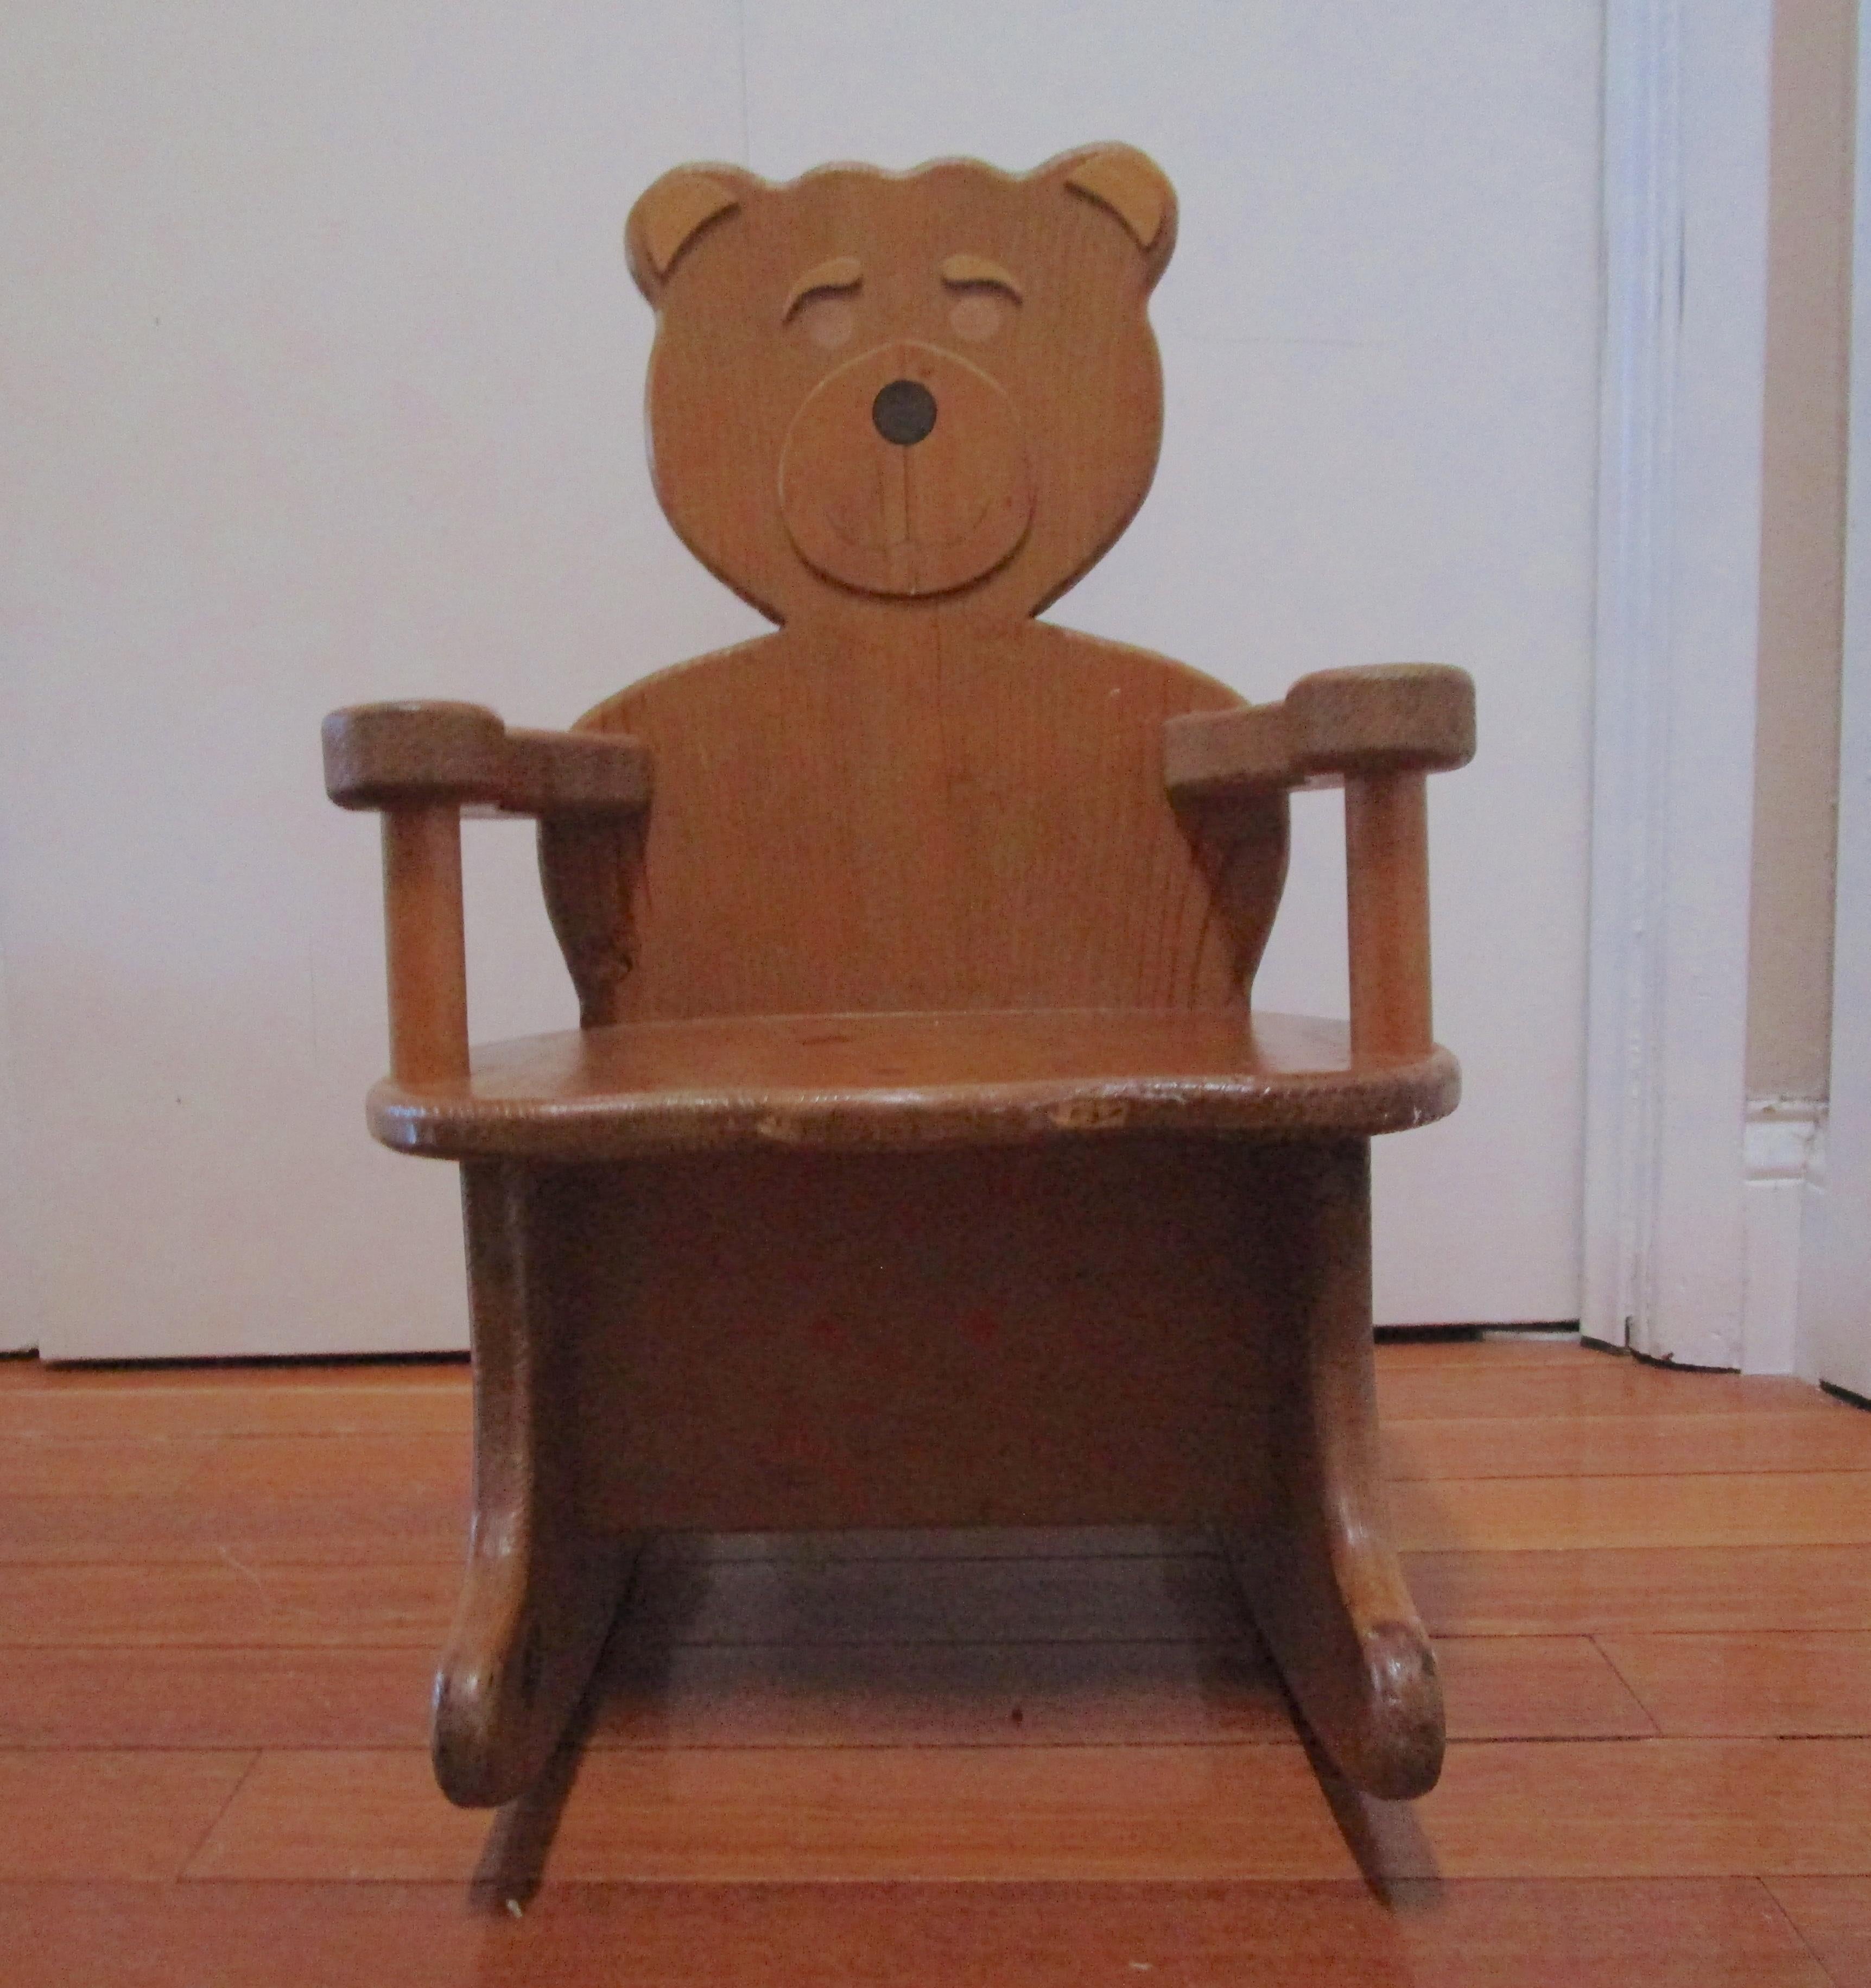 American Vintage Hand Crafted Child's Teddy Bear Rocking Chair Stamped Tony Biele